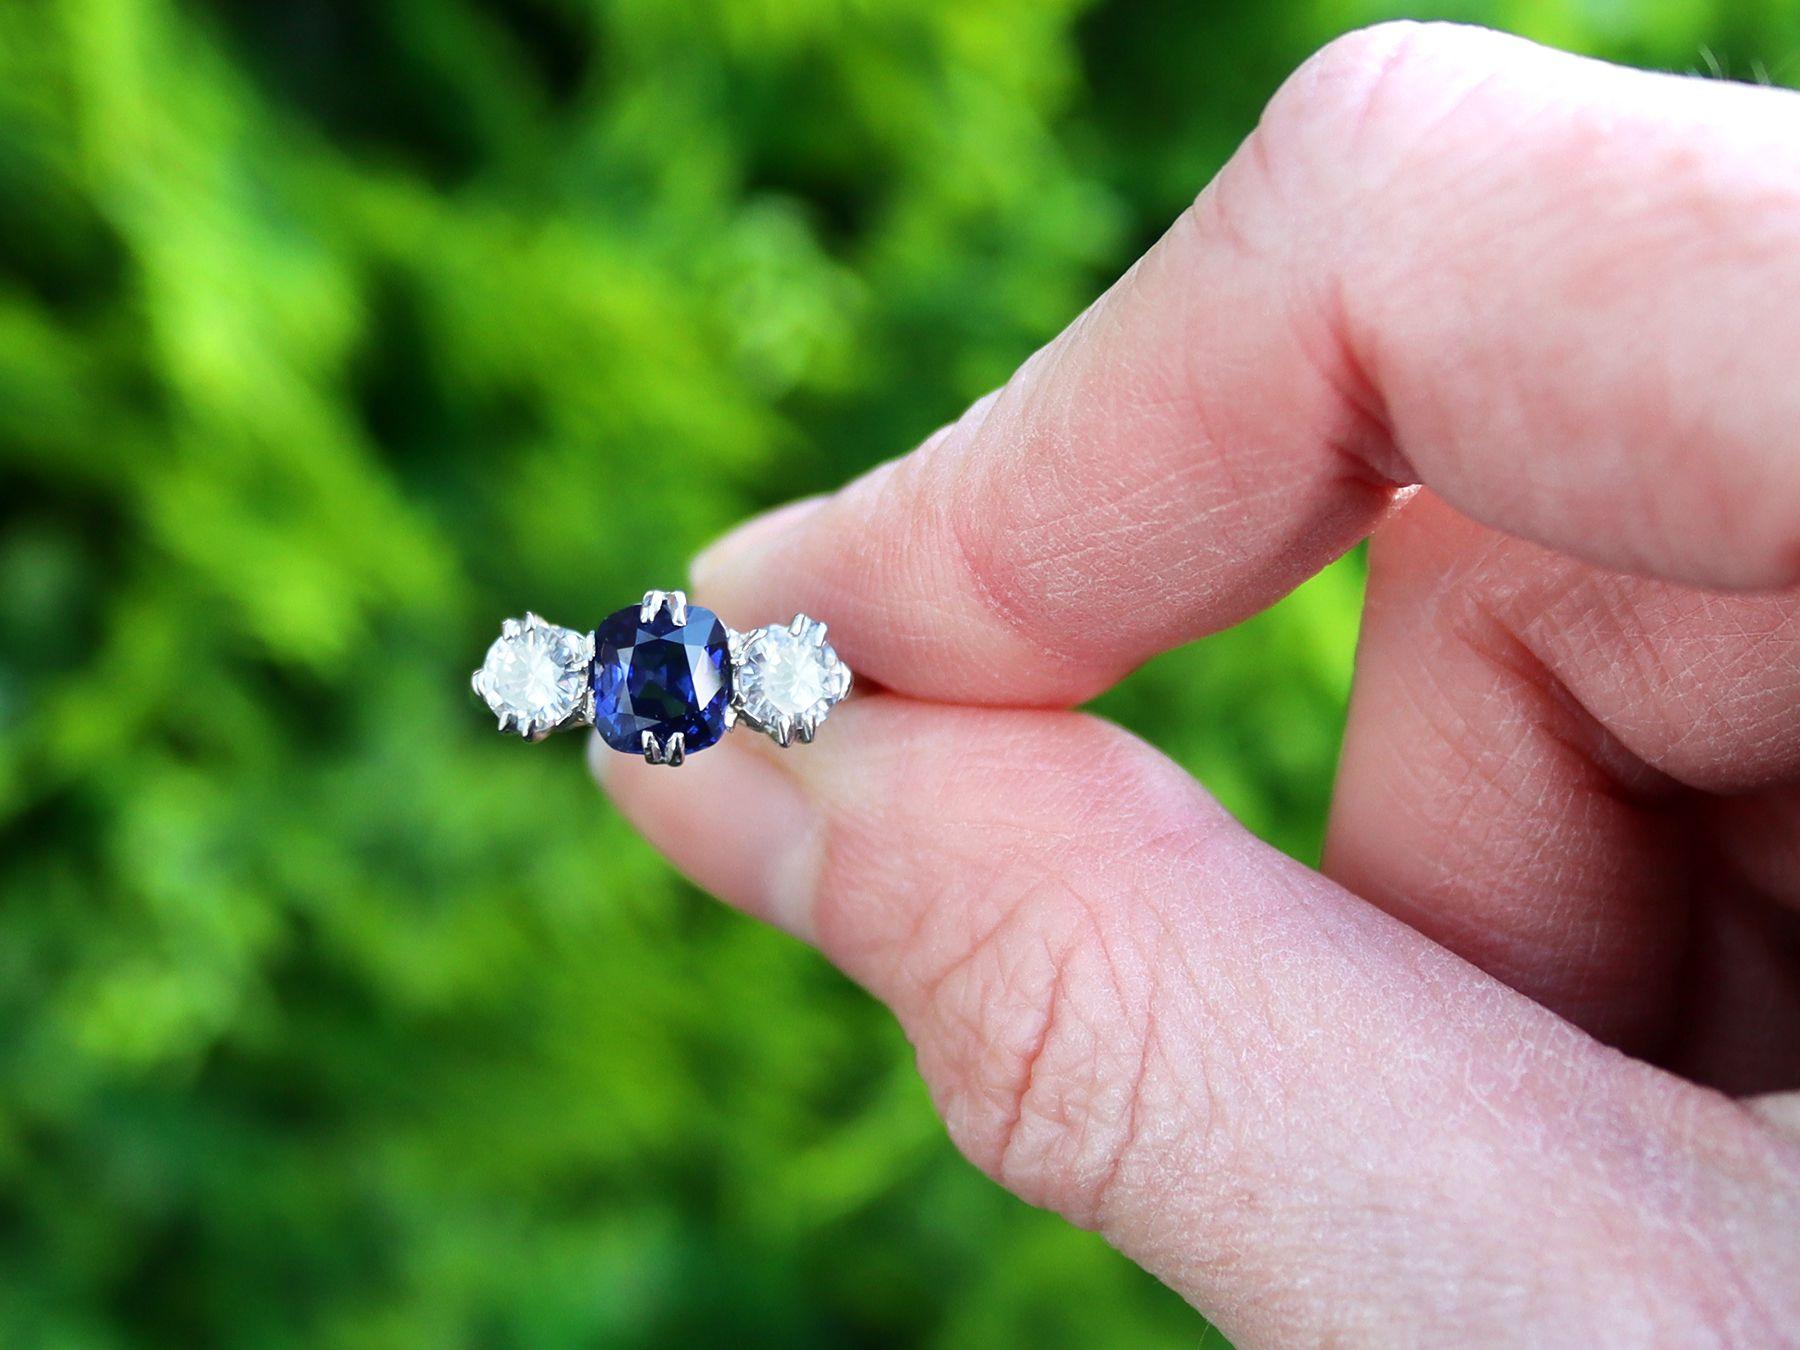 A stunning, fine and impressive antique 1.33 carat Basaltic sapphire and 0.88 carat diamond, platinum trilogy ring; part of our diverse antique jewelry and estate jewelry collections.

This stunning, fine and impressive trilogy sapphire ring has